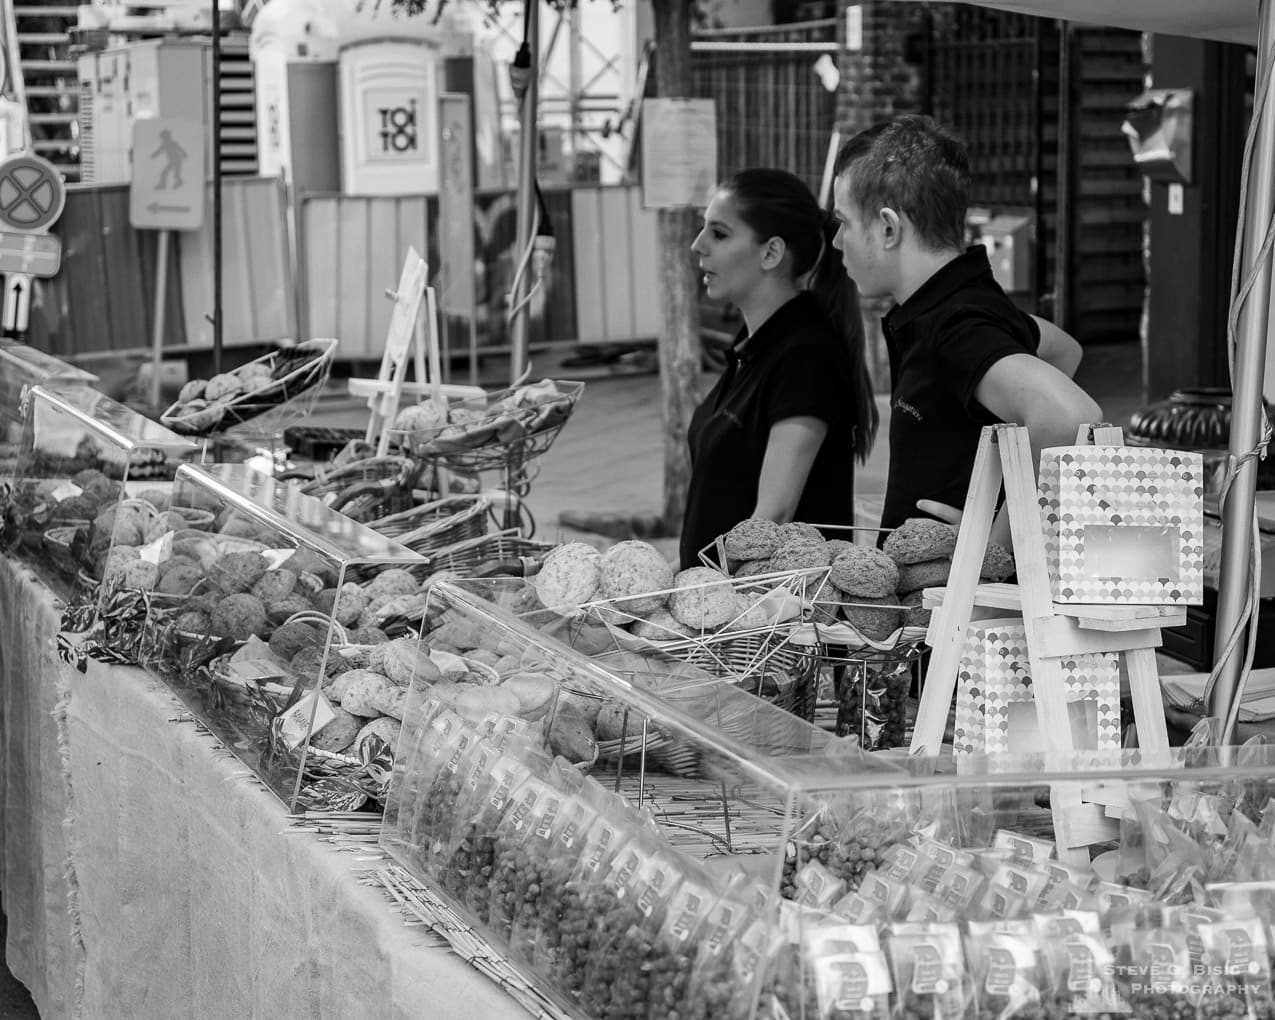 Photo 25/32 of a series of black and white photographs from the 2018 Grande Braderie D'Ixelles sidewalk sale and street festival in Brussels, Belgium.